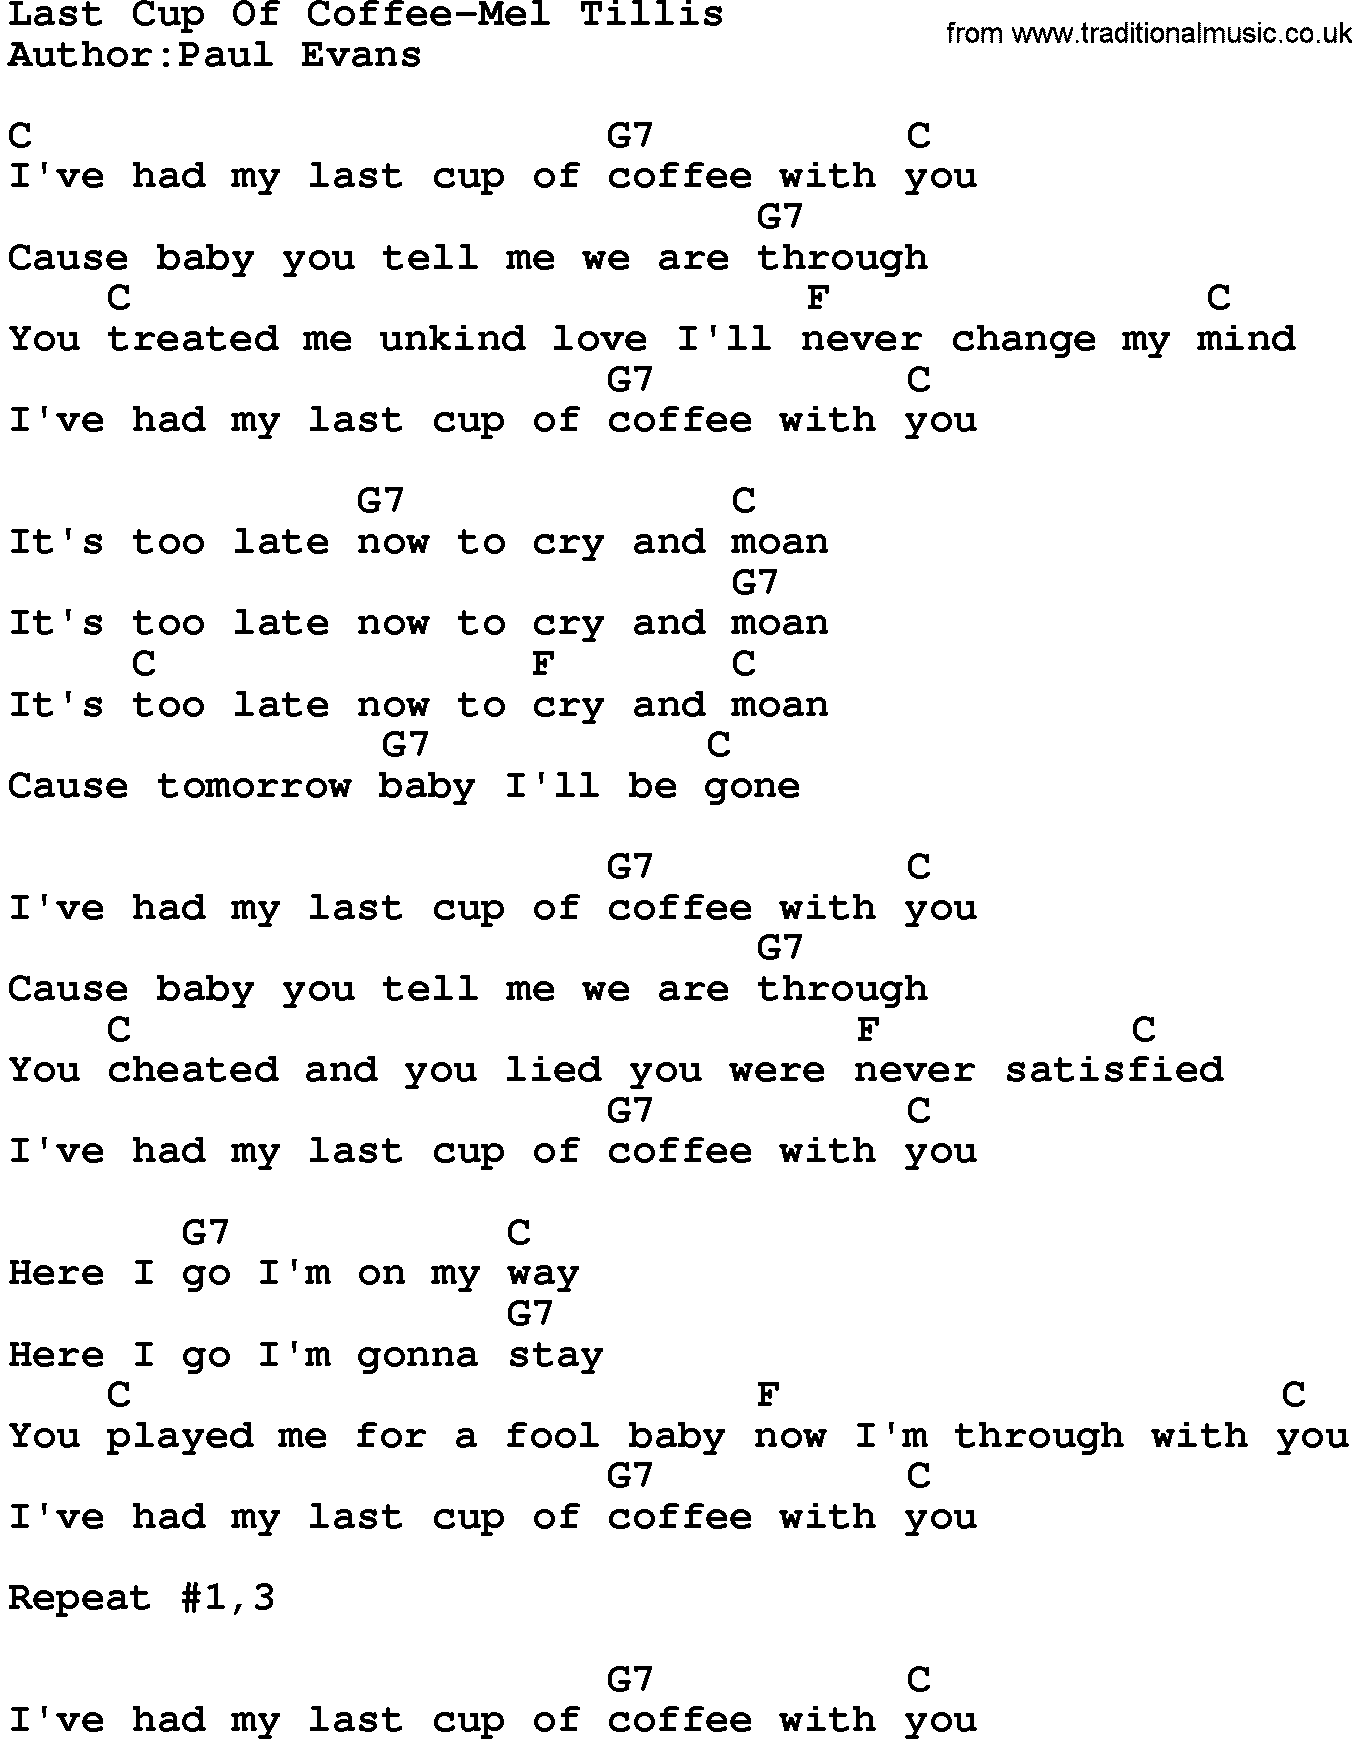 Country music song: Last Cup Of Coffee-Mel Tillis lyrics and chords